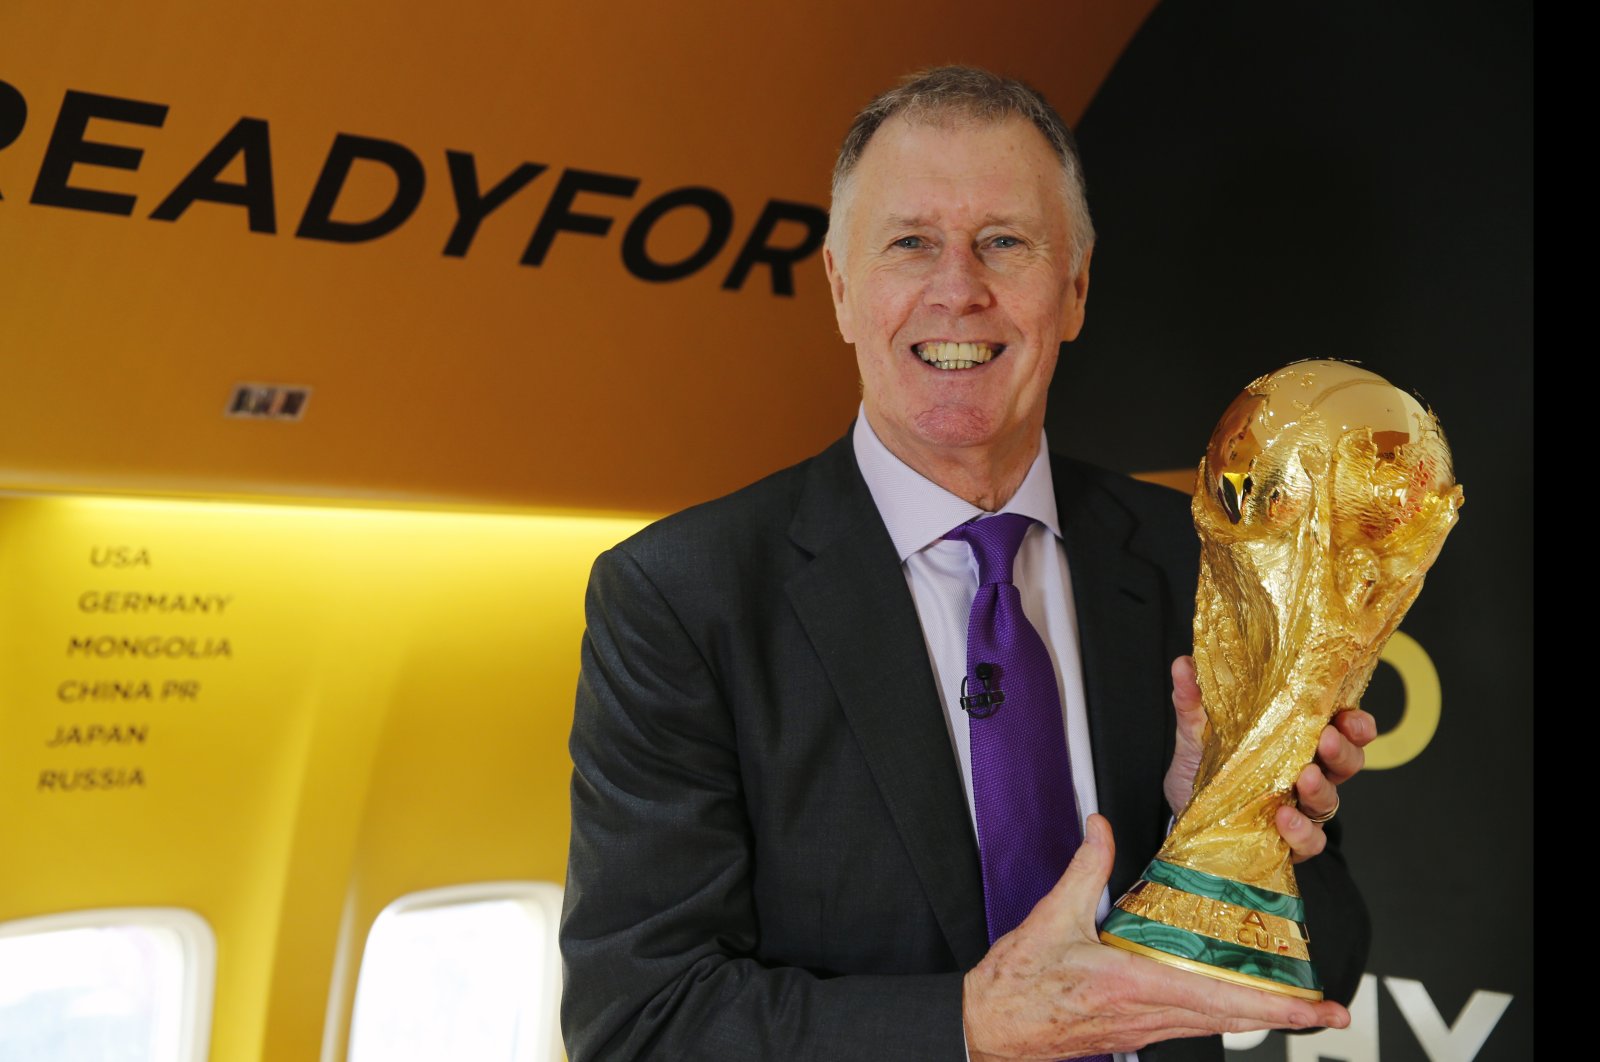 Geoff Hurst holds the FIFA World Cup trophy during the first leg of the soccer World Cup 2018 trophy tour at Stansted Airport, London, England, Jan. 22, 2018. (AP Photo)